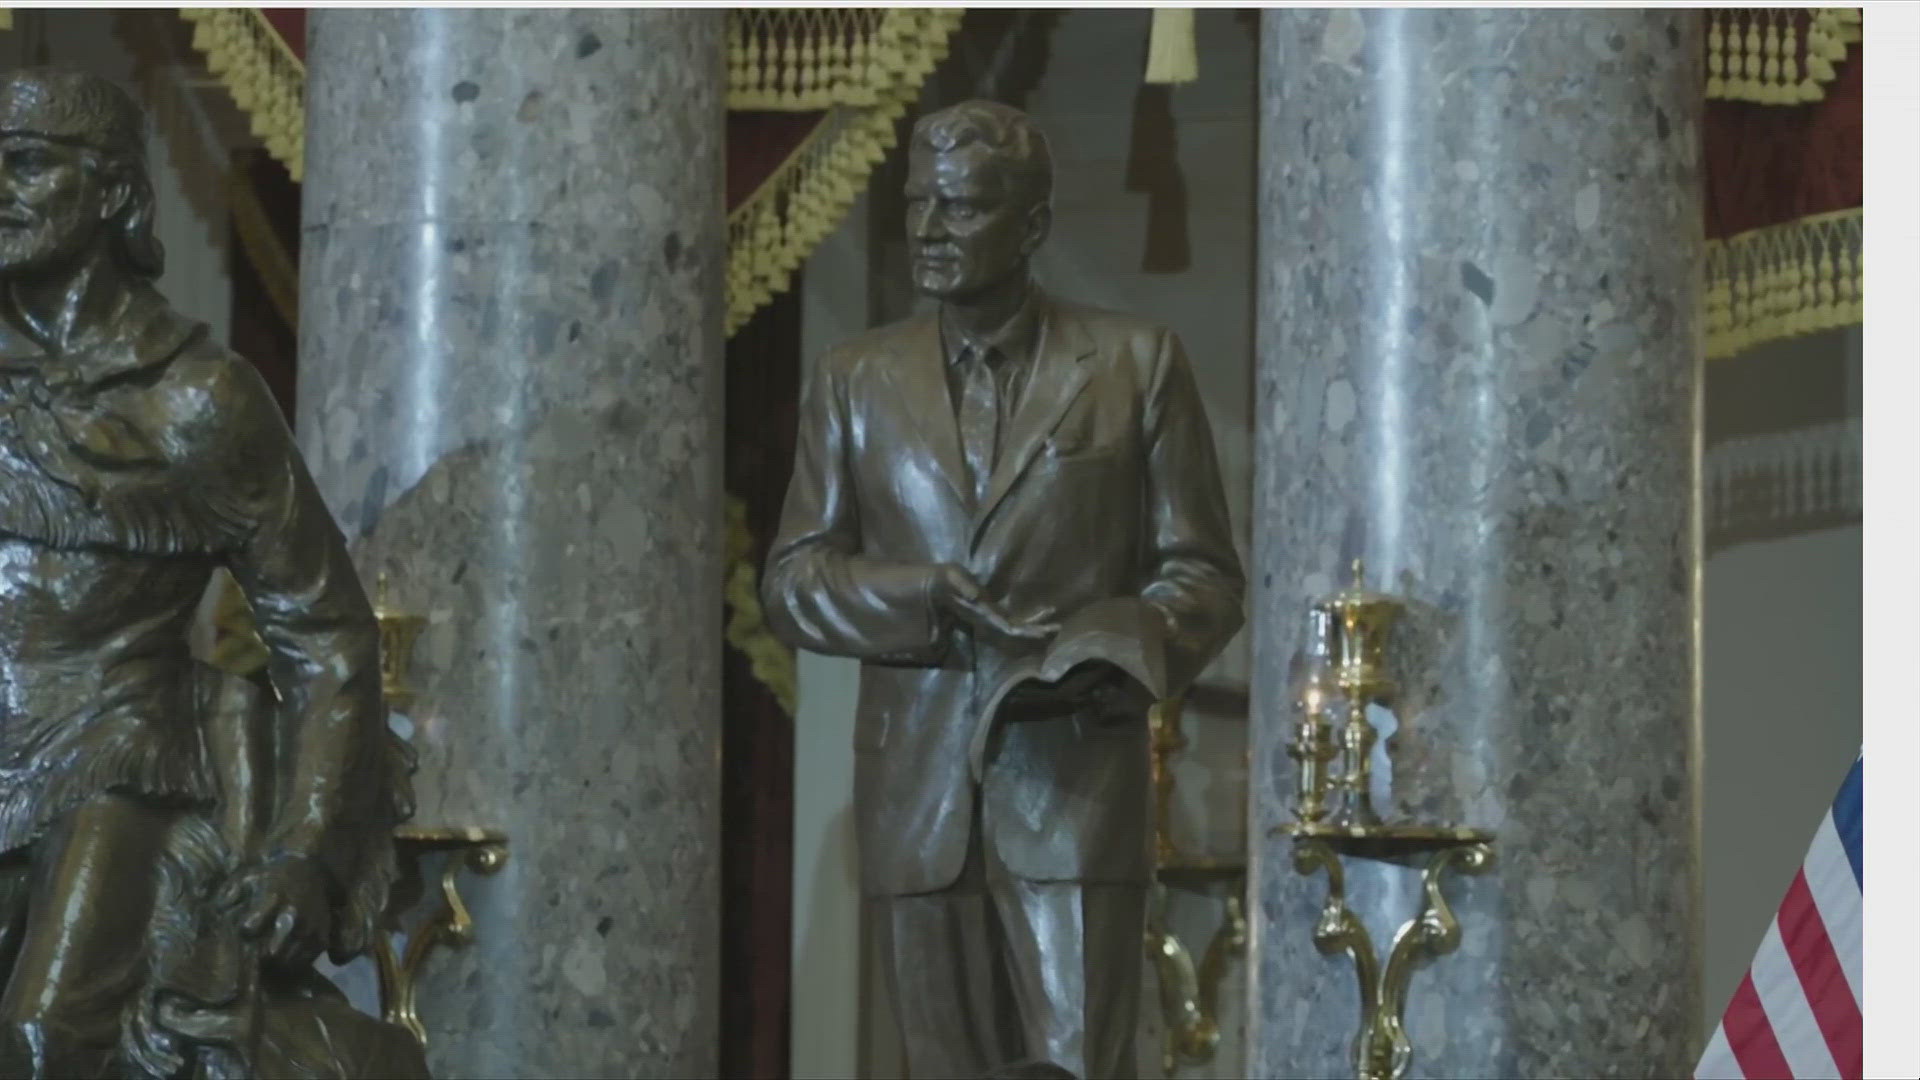 The sculpture depicts Graham gesturing toward an open Bible in his hand.